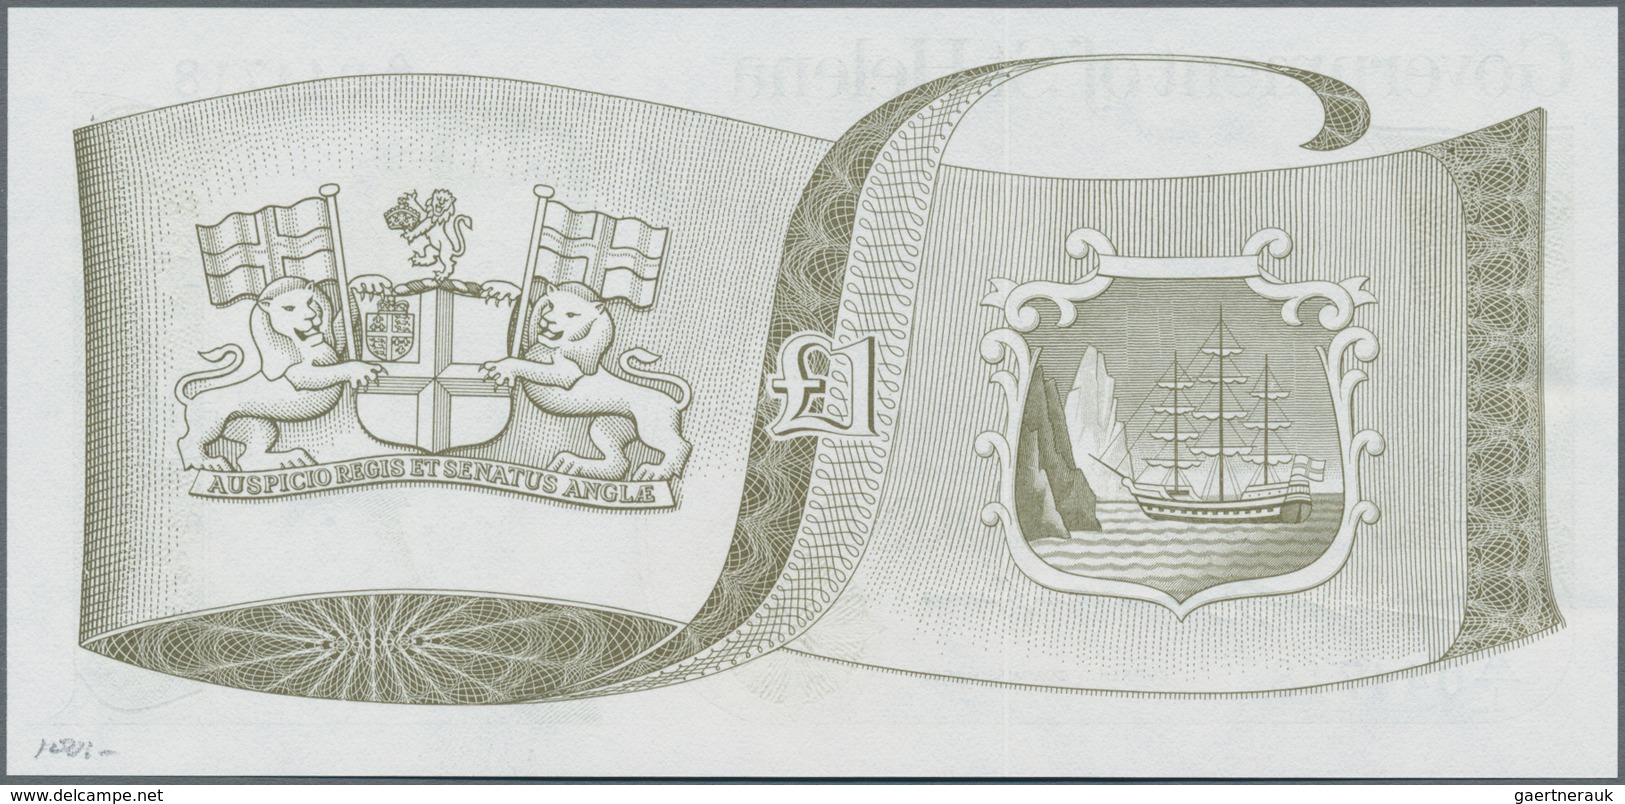 St. Helena: Government Of St. Helena Pair With 50 Pence And 1 Pound ND(1976-79), P.5, 6, Both In UNC - St. Helena